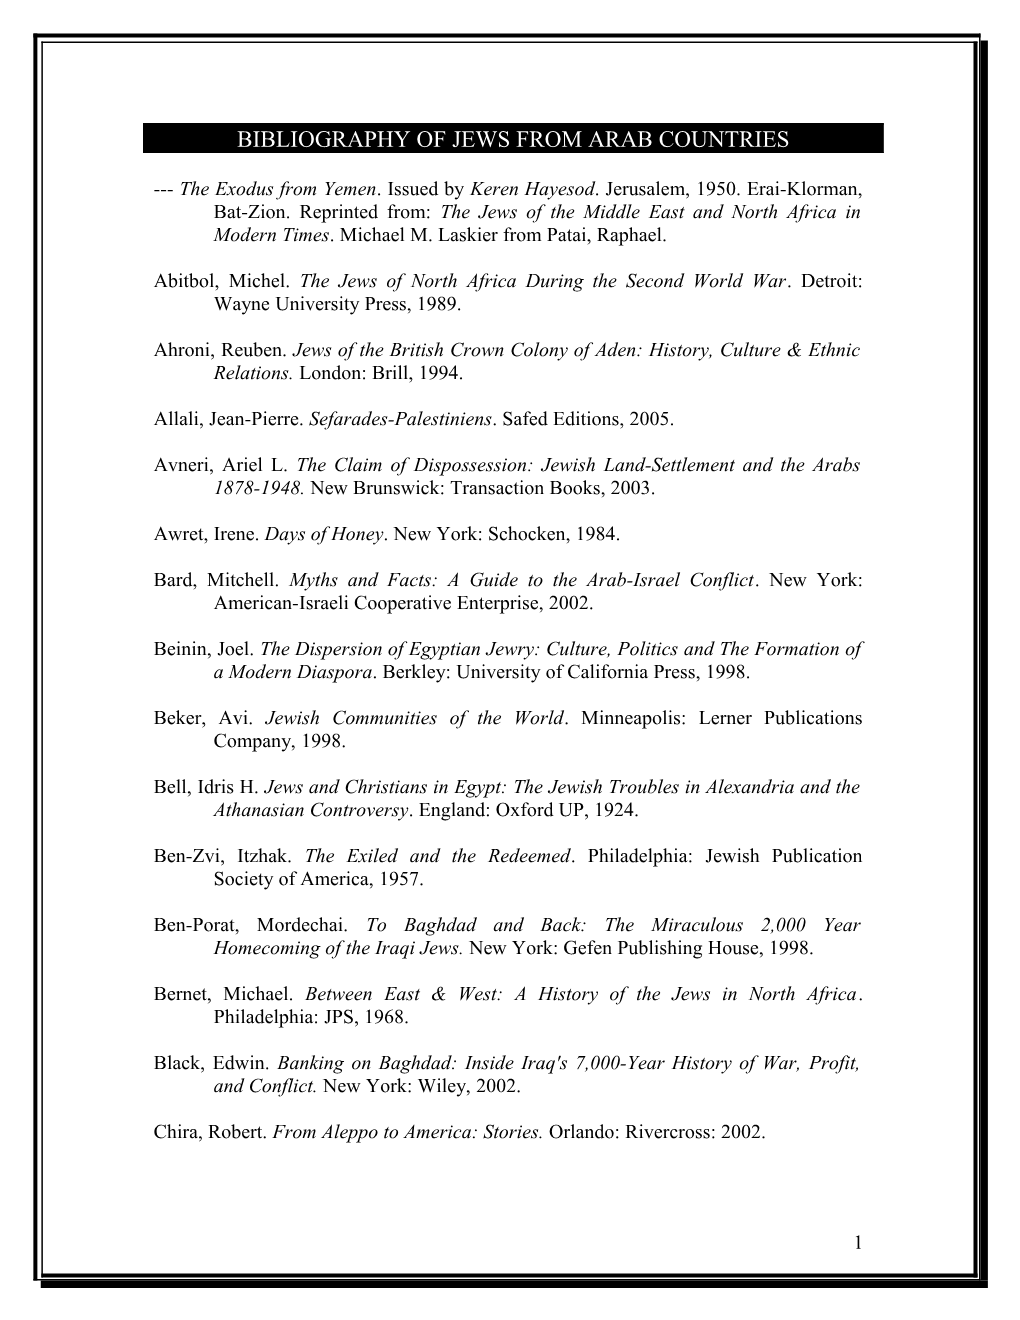 Bibliography of Jews from Arab Countries